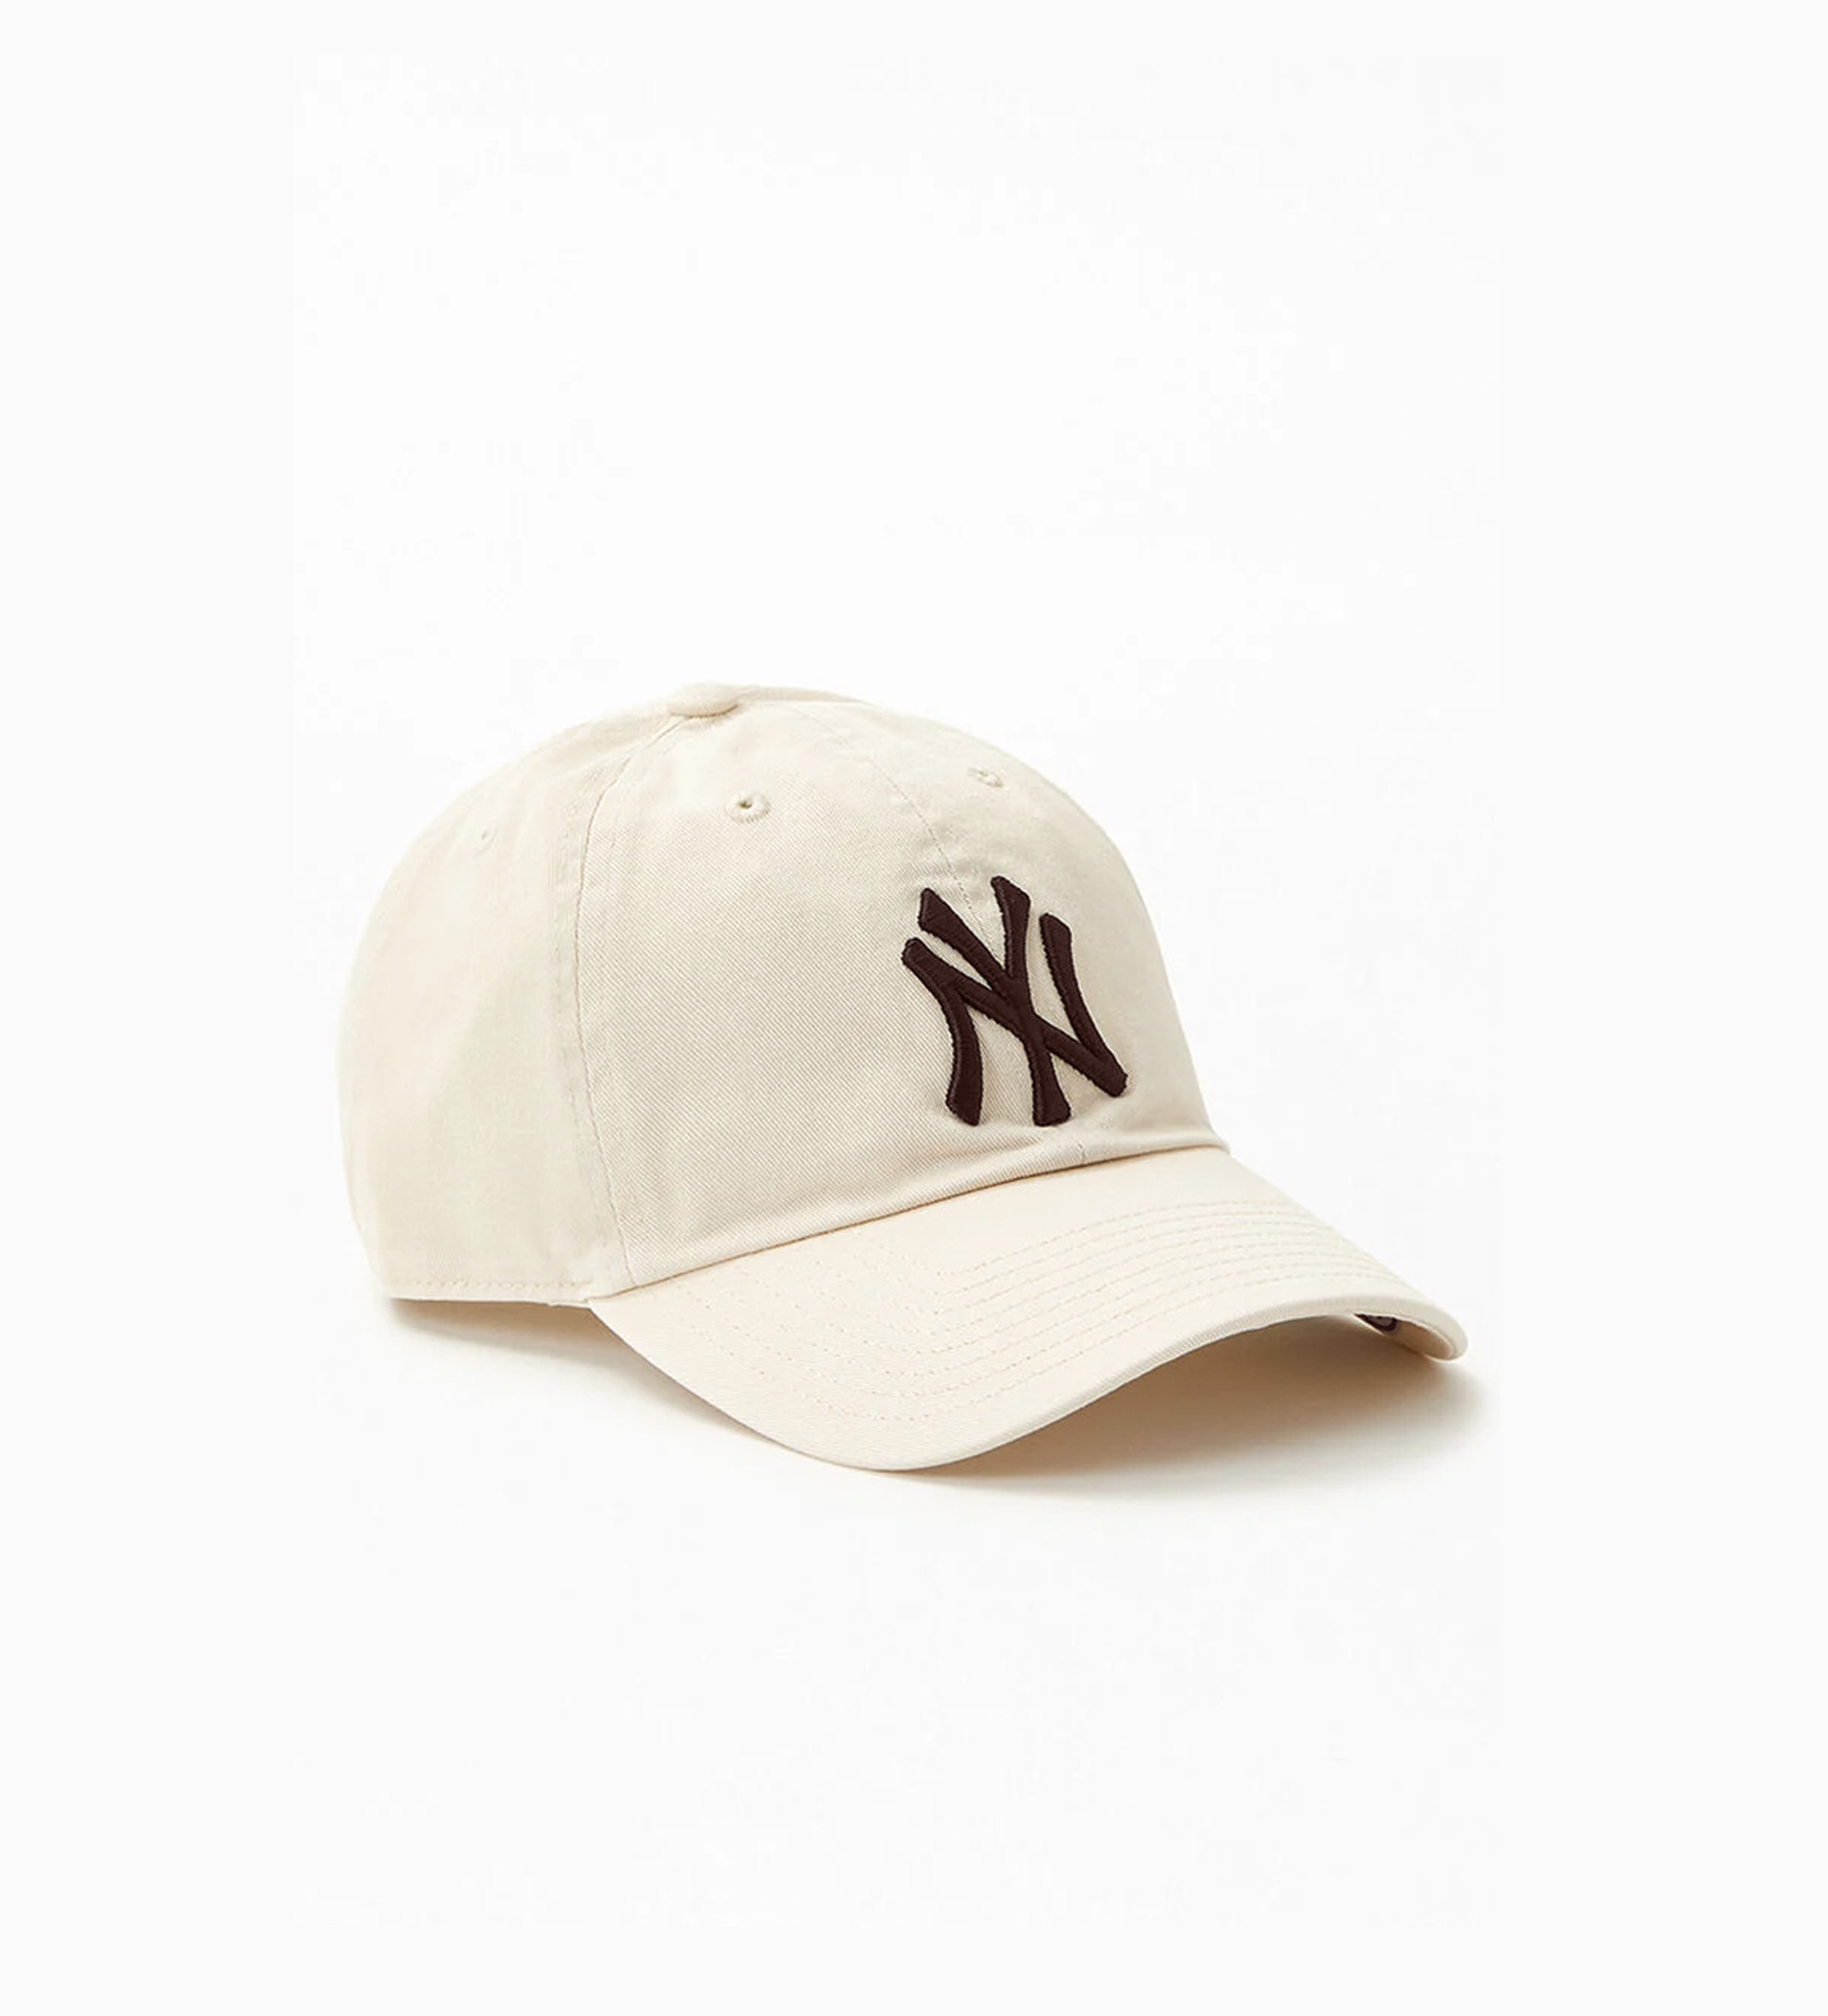 Classic NY YANKEES BROWNS DAD HAT